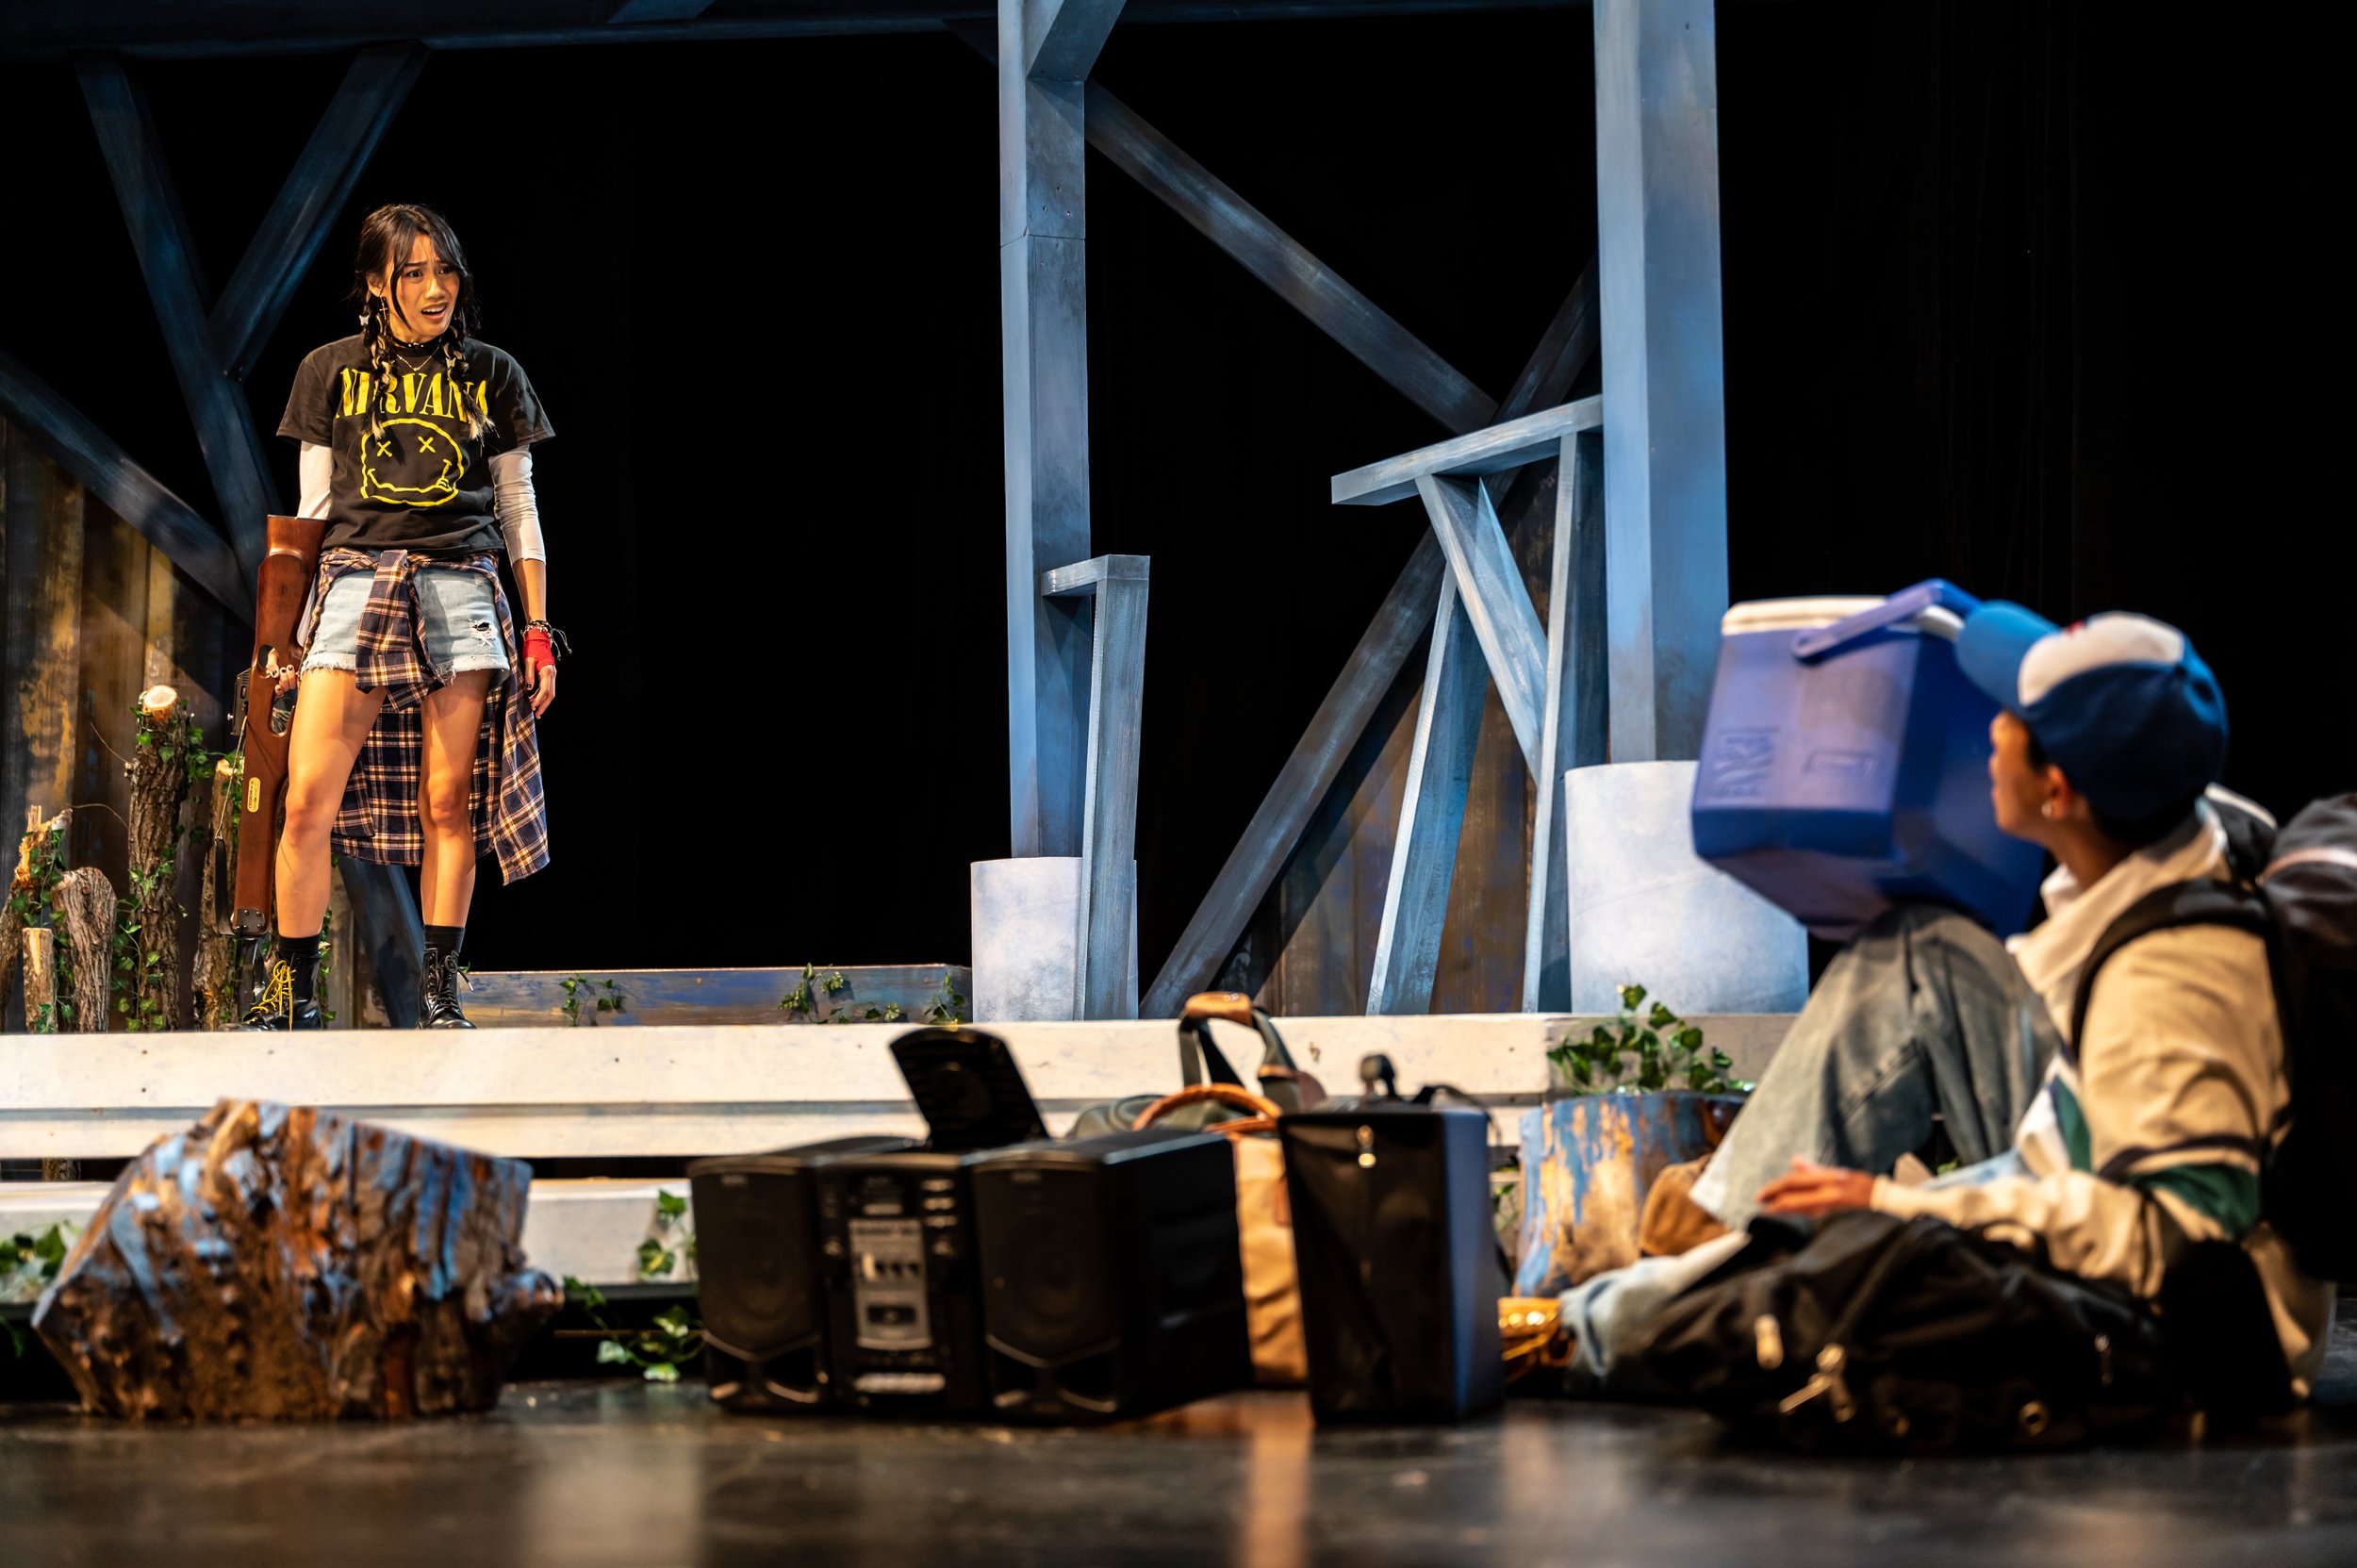  Pictured: Ericka Leobrera and Anthony Perpuse; Set &amp; Costume Design by Jackie Chau, Lighting Design by Michelle Ramsay, Photo by Dahlia Katz 